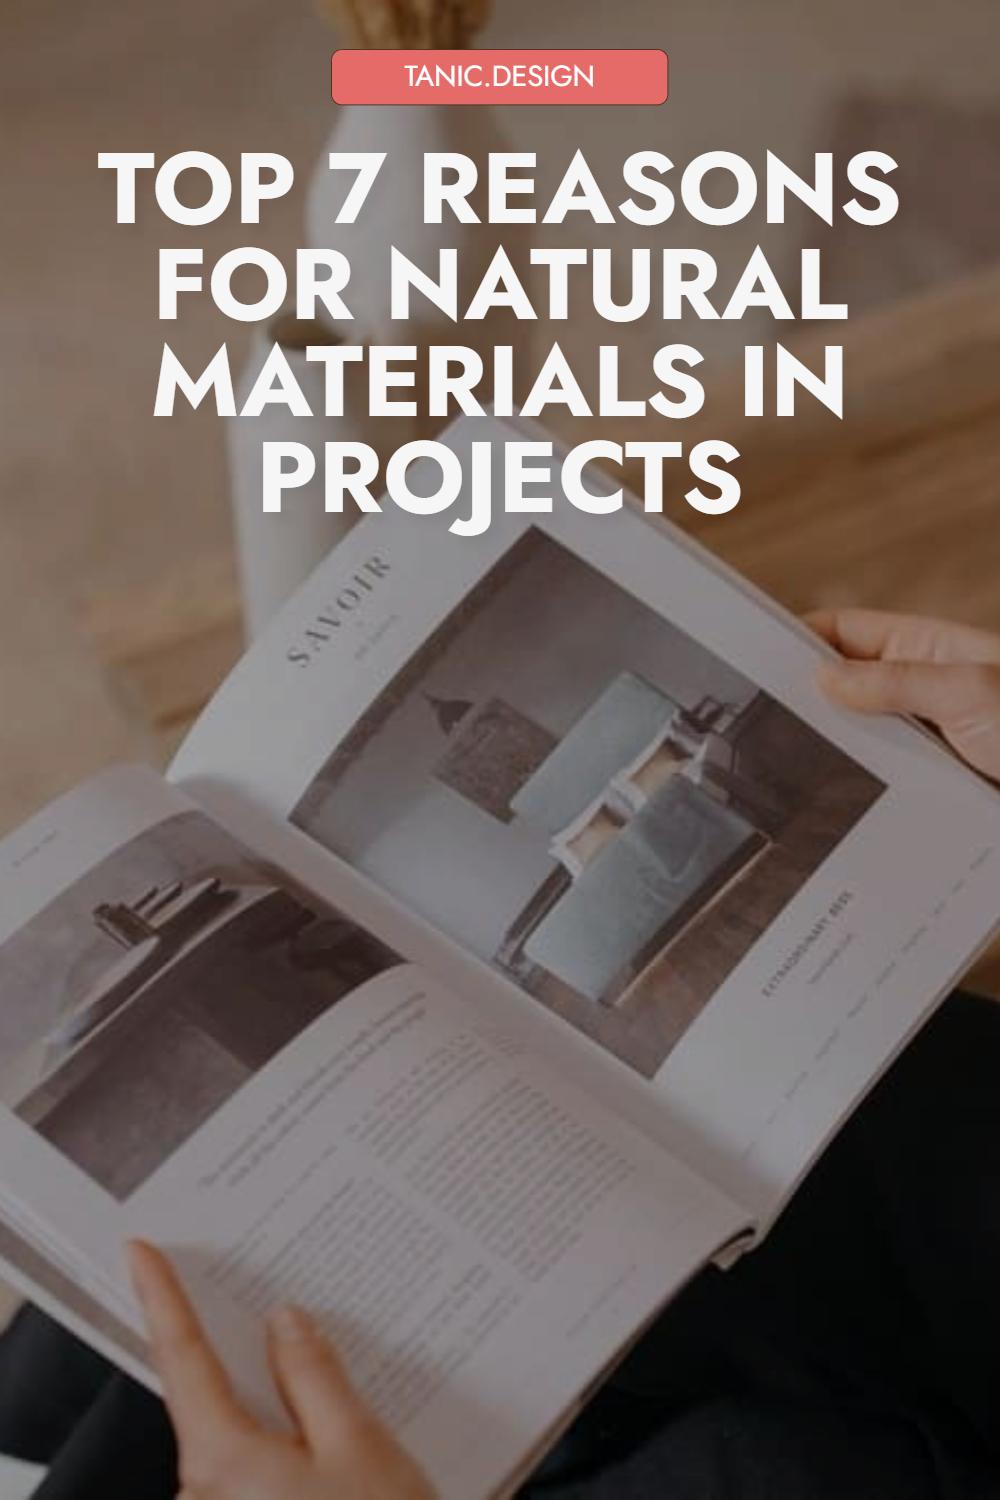 Key Benefits of Incorporating Natural Materials into Your Project